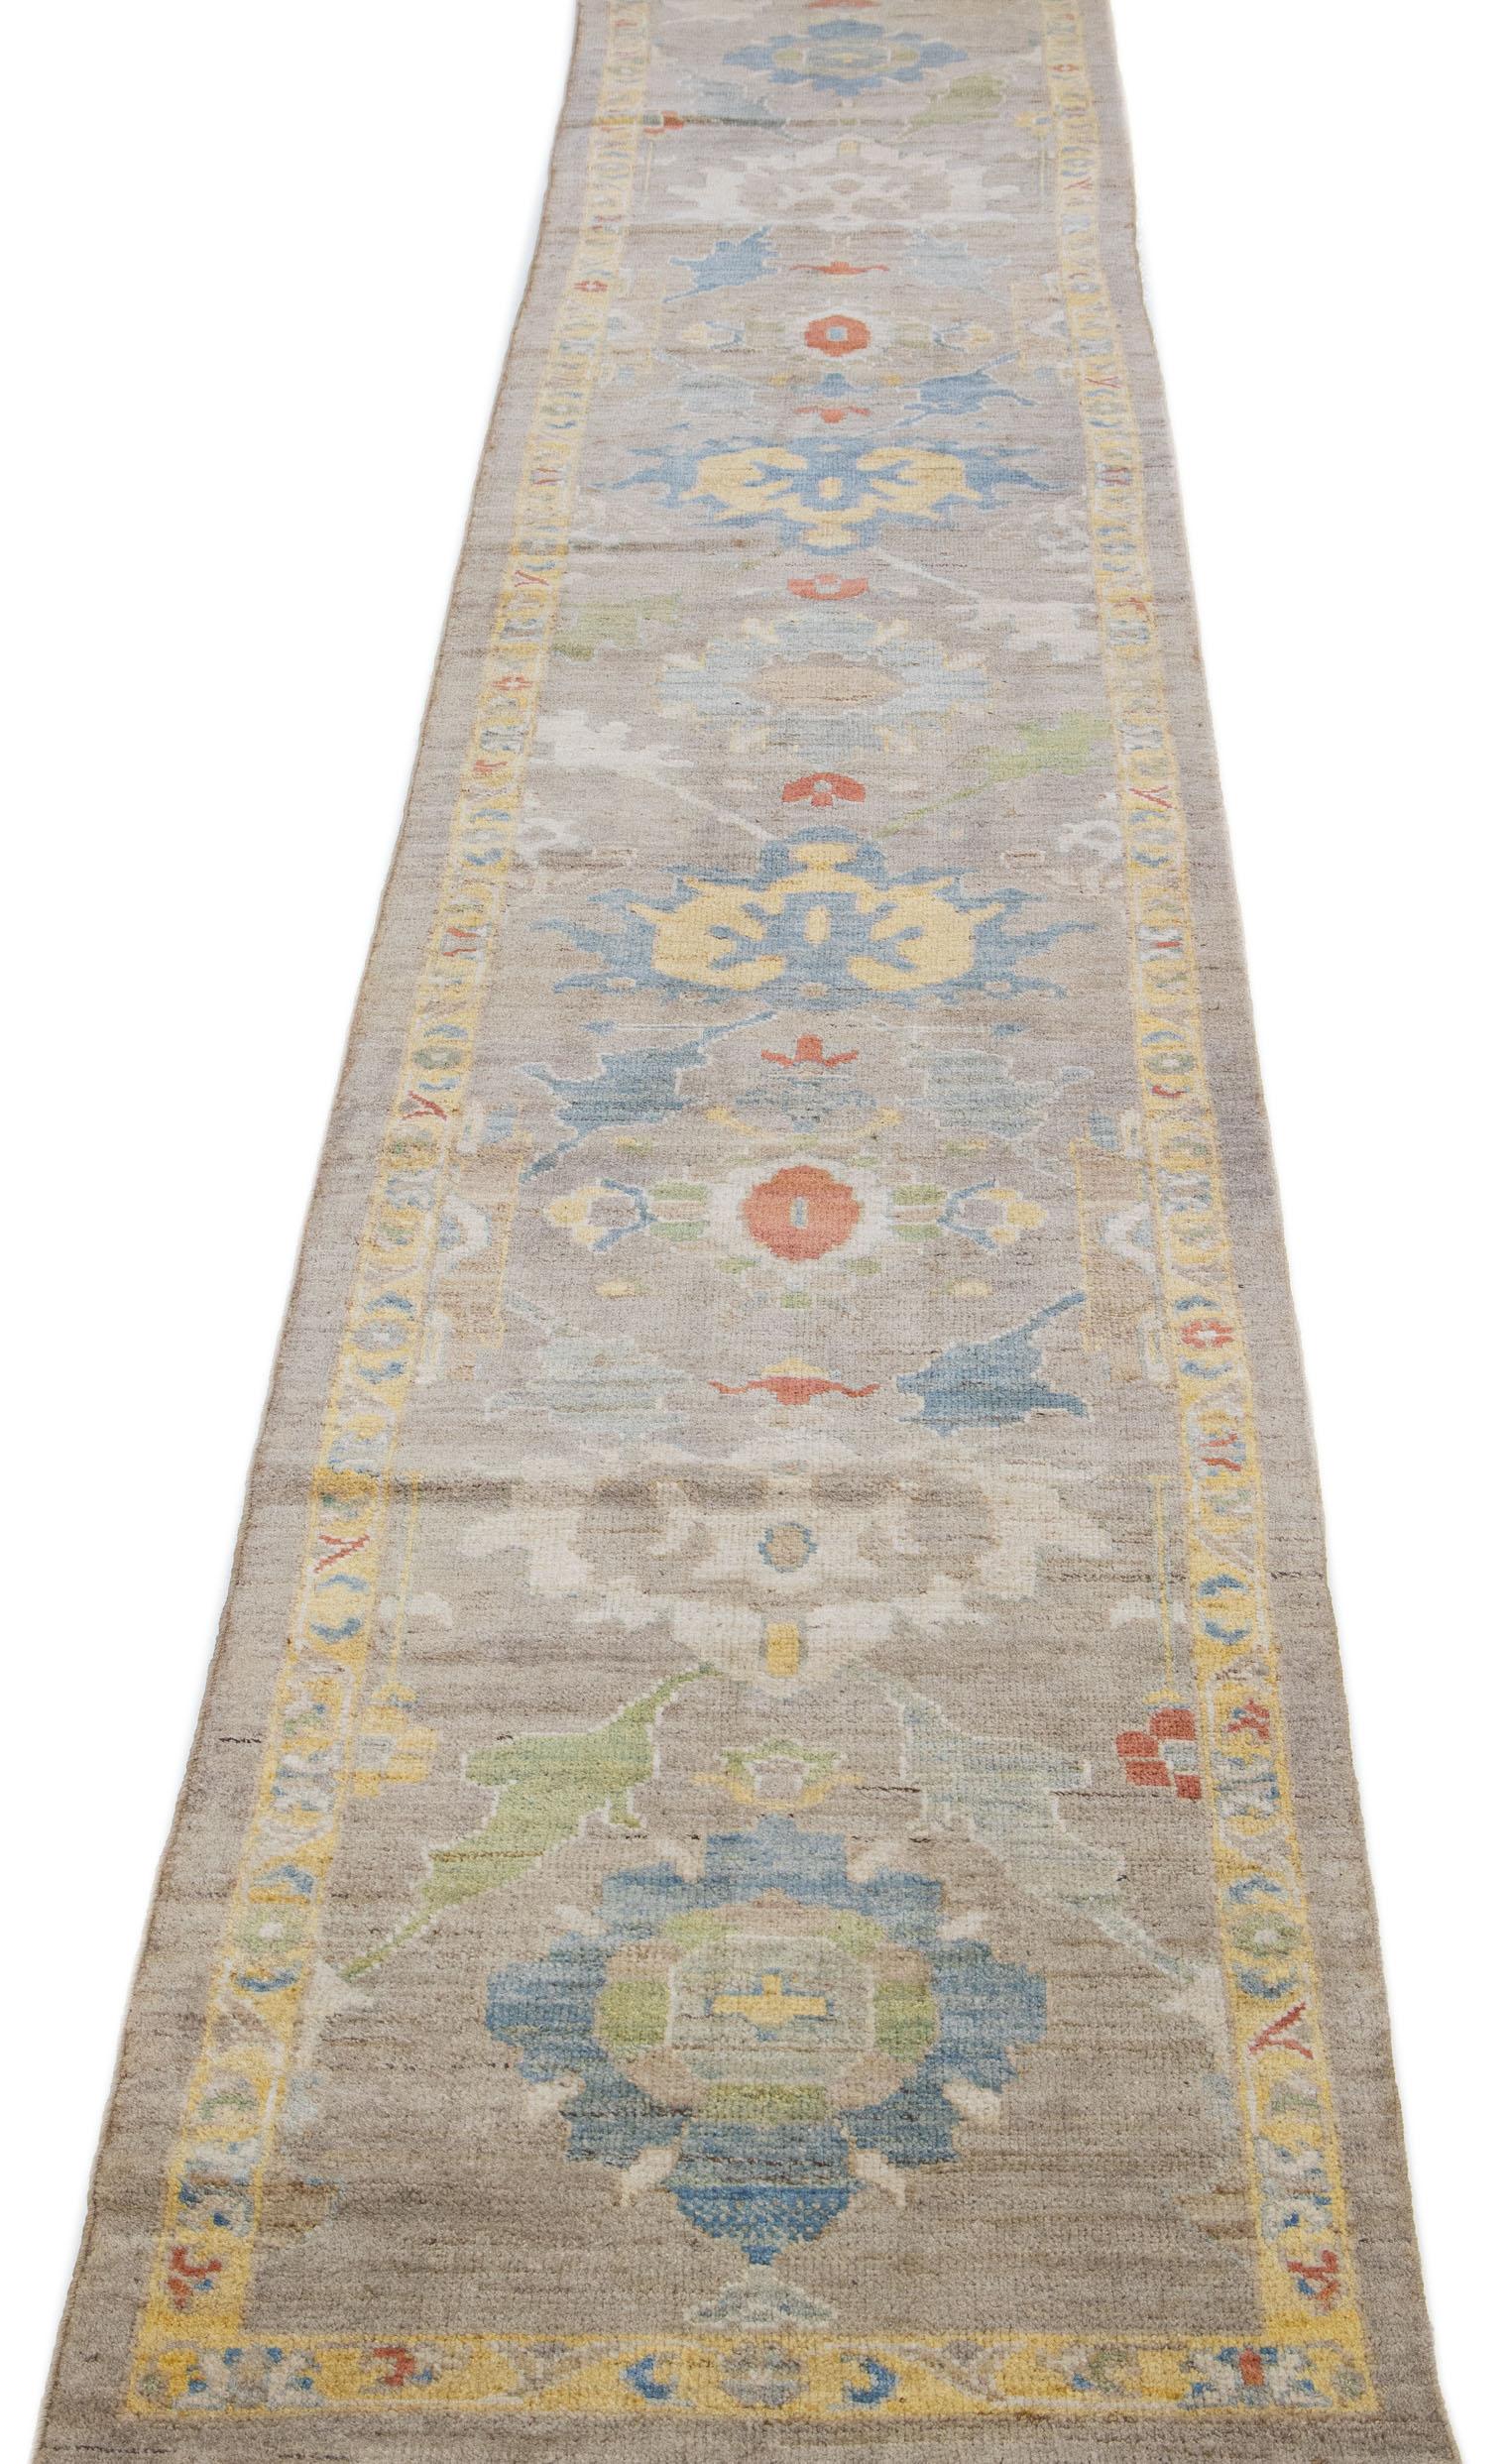 Beautiful modern Sultanabad hand-knotted wool rug with a tan color field. This rug has a designed frame with multicolor accents in a gorgeous all-over floral design.

This rug measures: 2'8